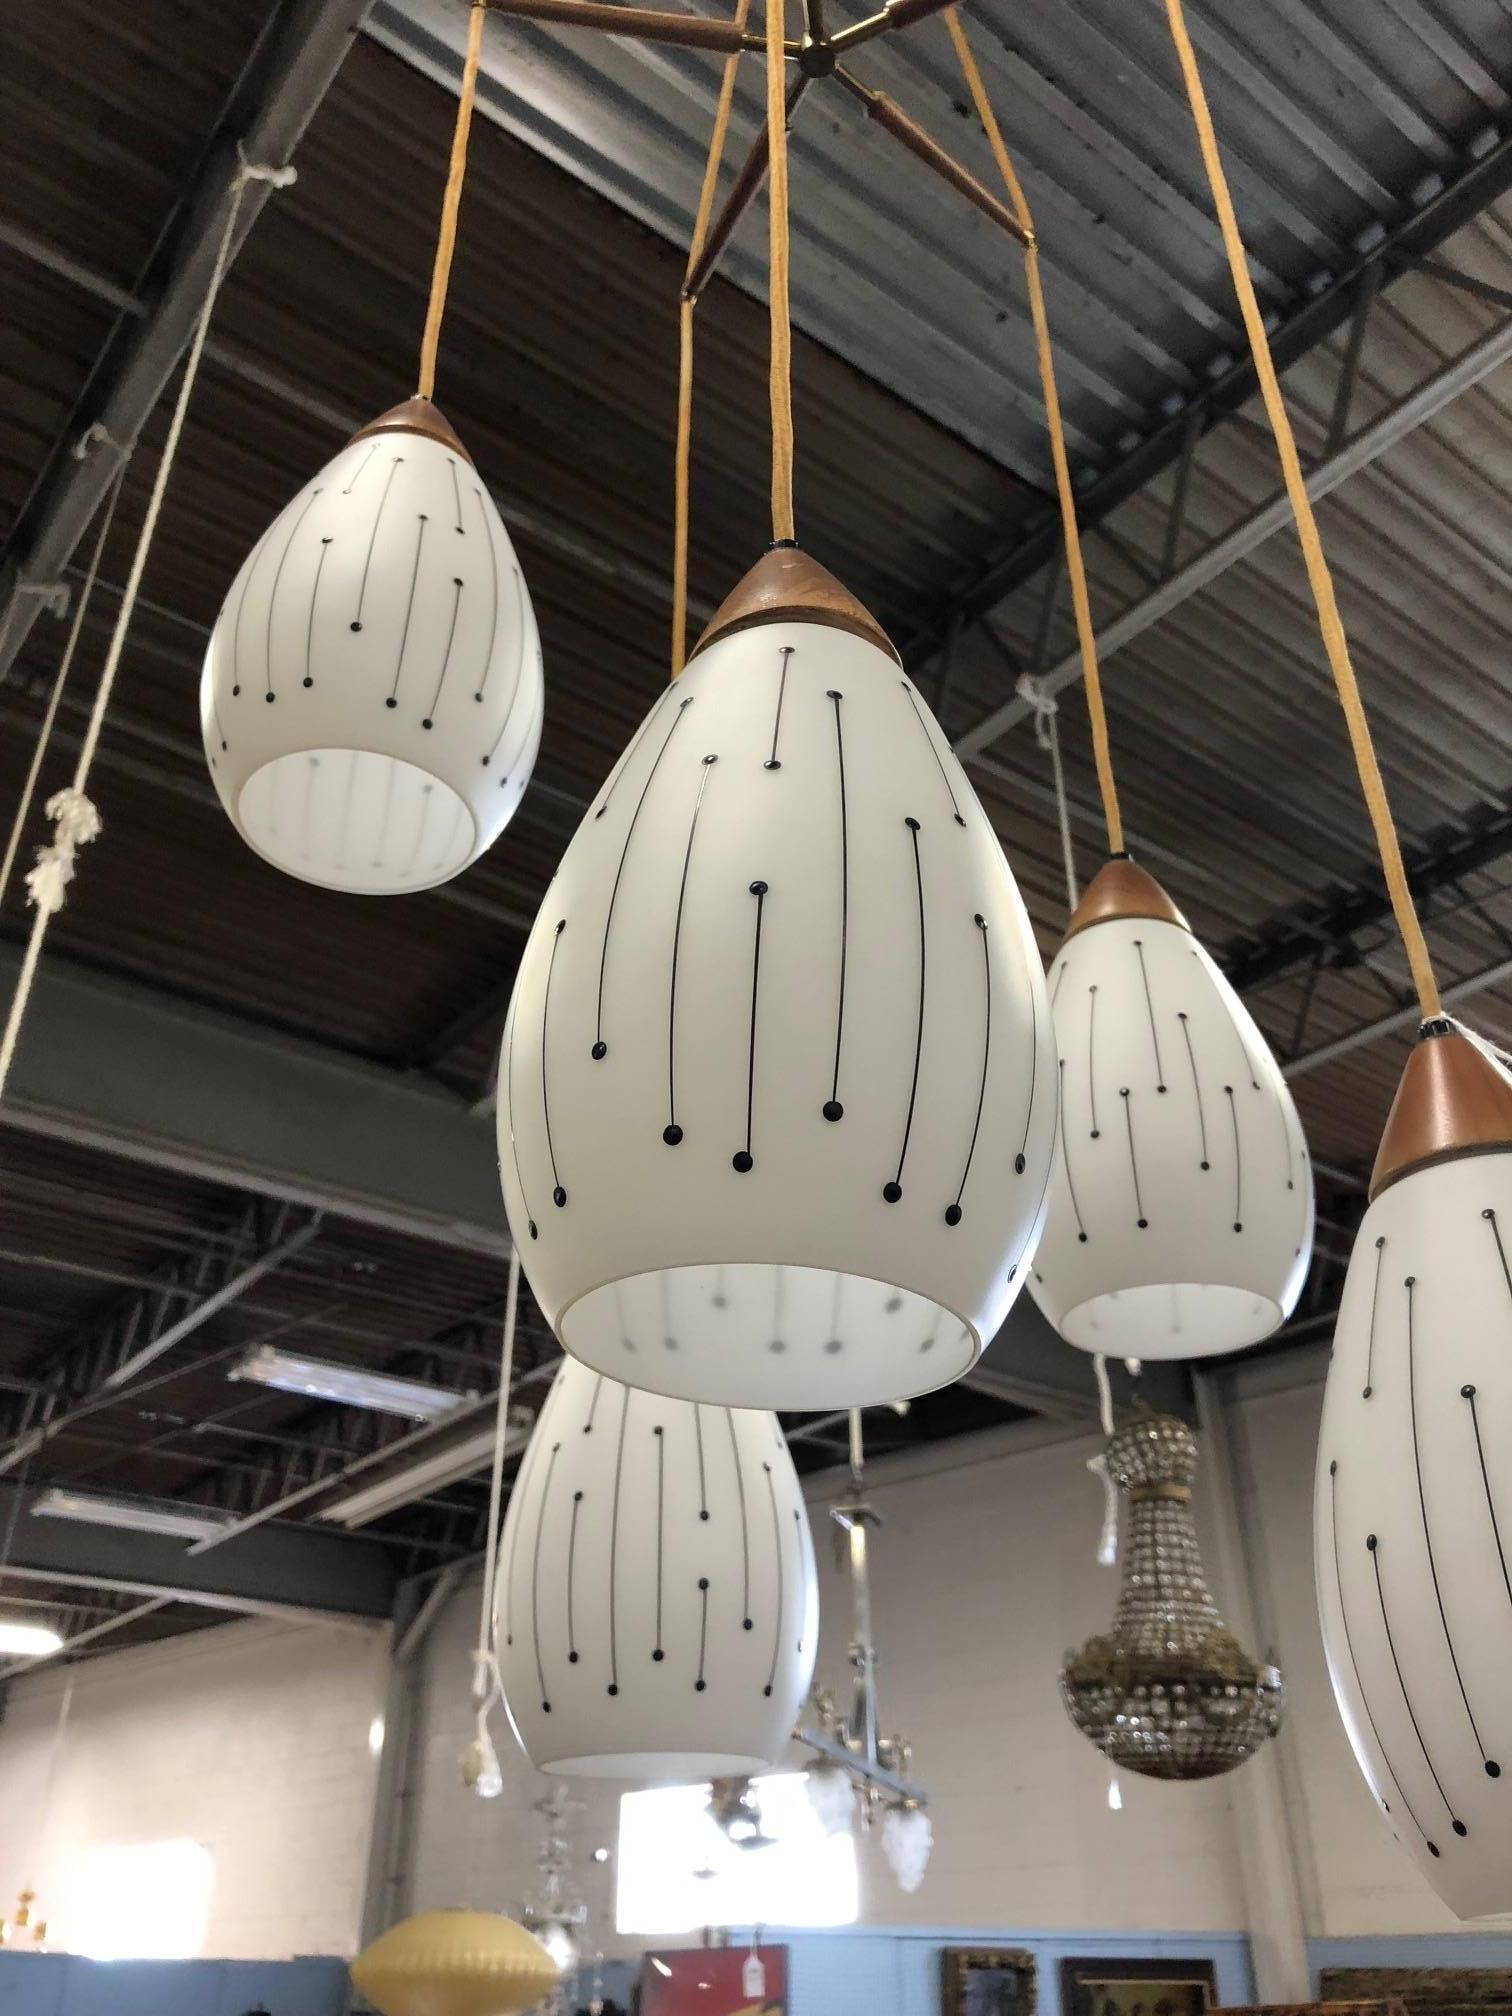 Mid-Century Modern five-pendant light fixture. Has etched glass shades. The tops of the shades are solid walnut. The ceiling cap at the top of the light fixture is brass.